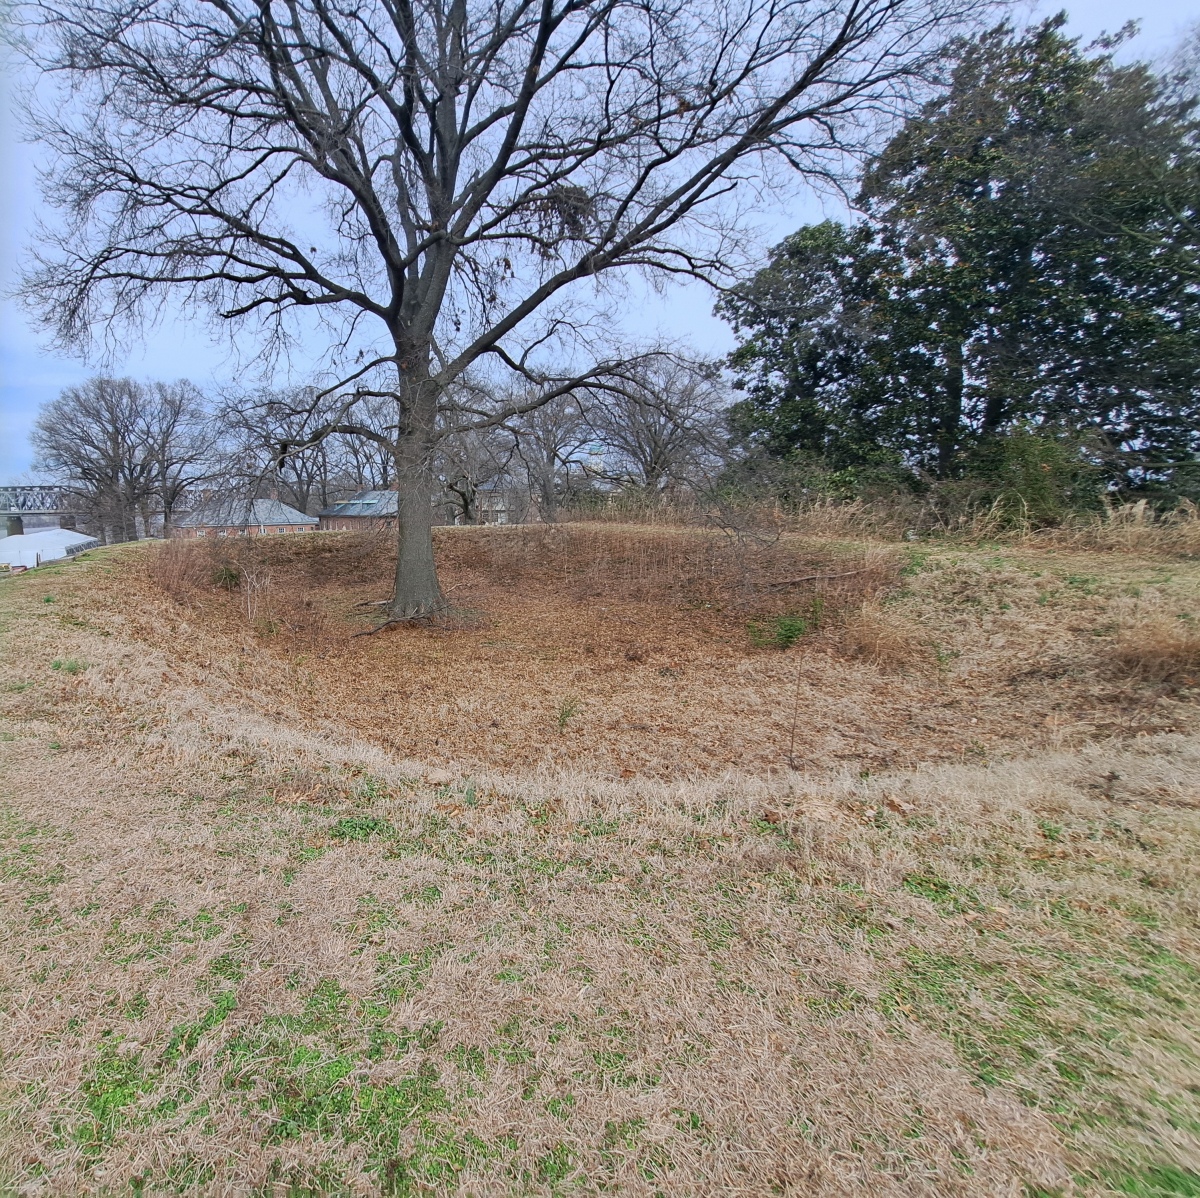 The rectangular platform mound closest to the Miss River. The hollowed out area on top was a Civil War modification to accommodate guns and troops. Was originally a Confederate redoubt but was captured by the Union troops relatively early in the war.